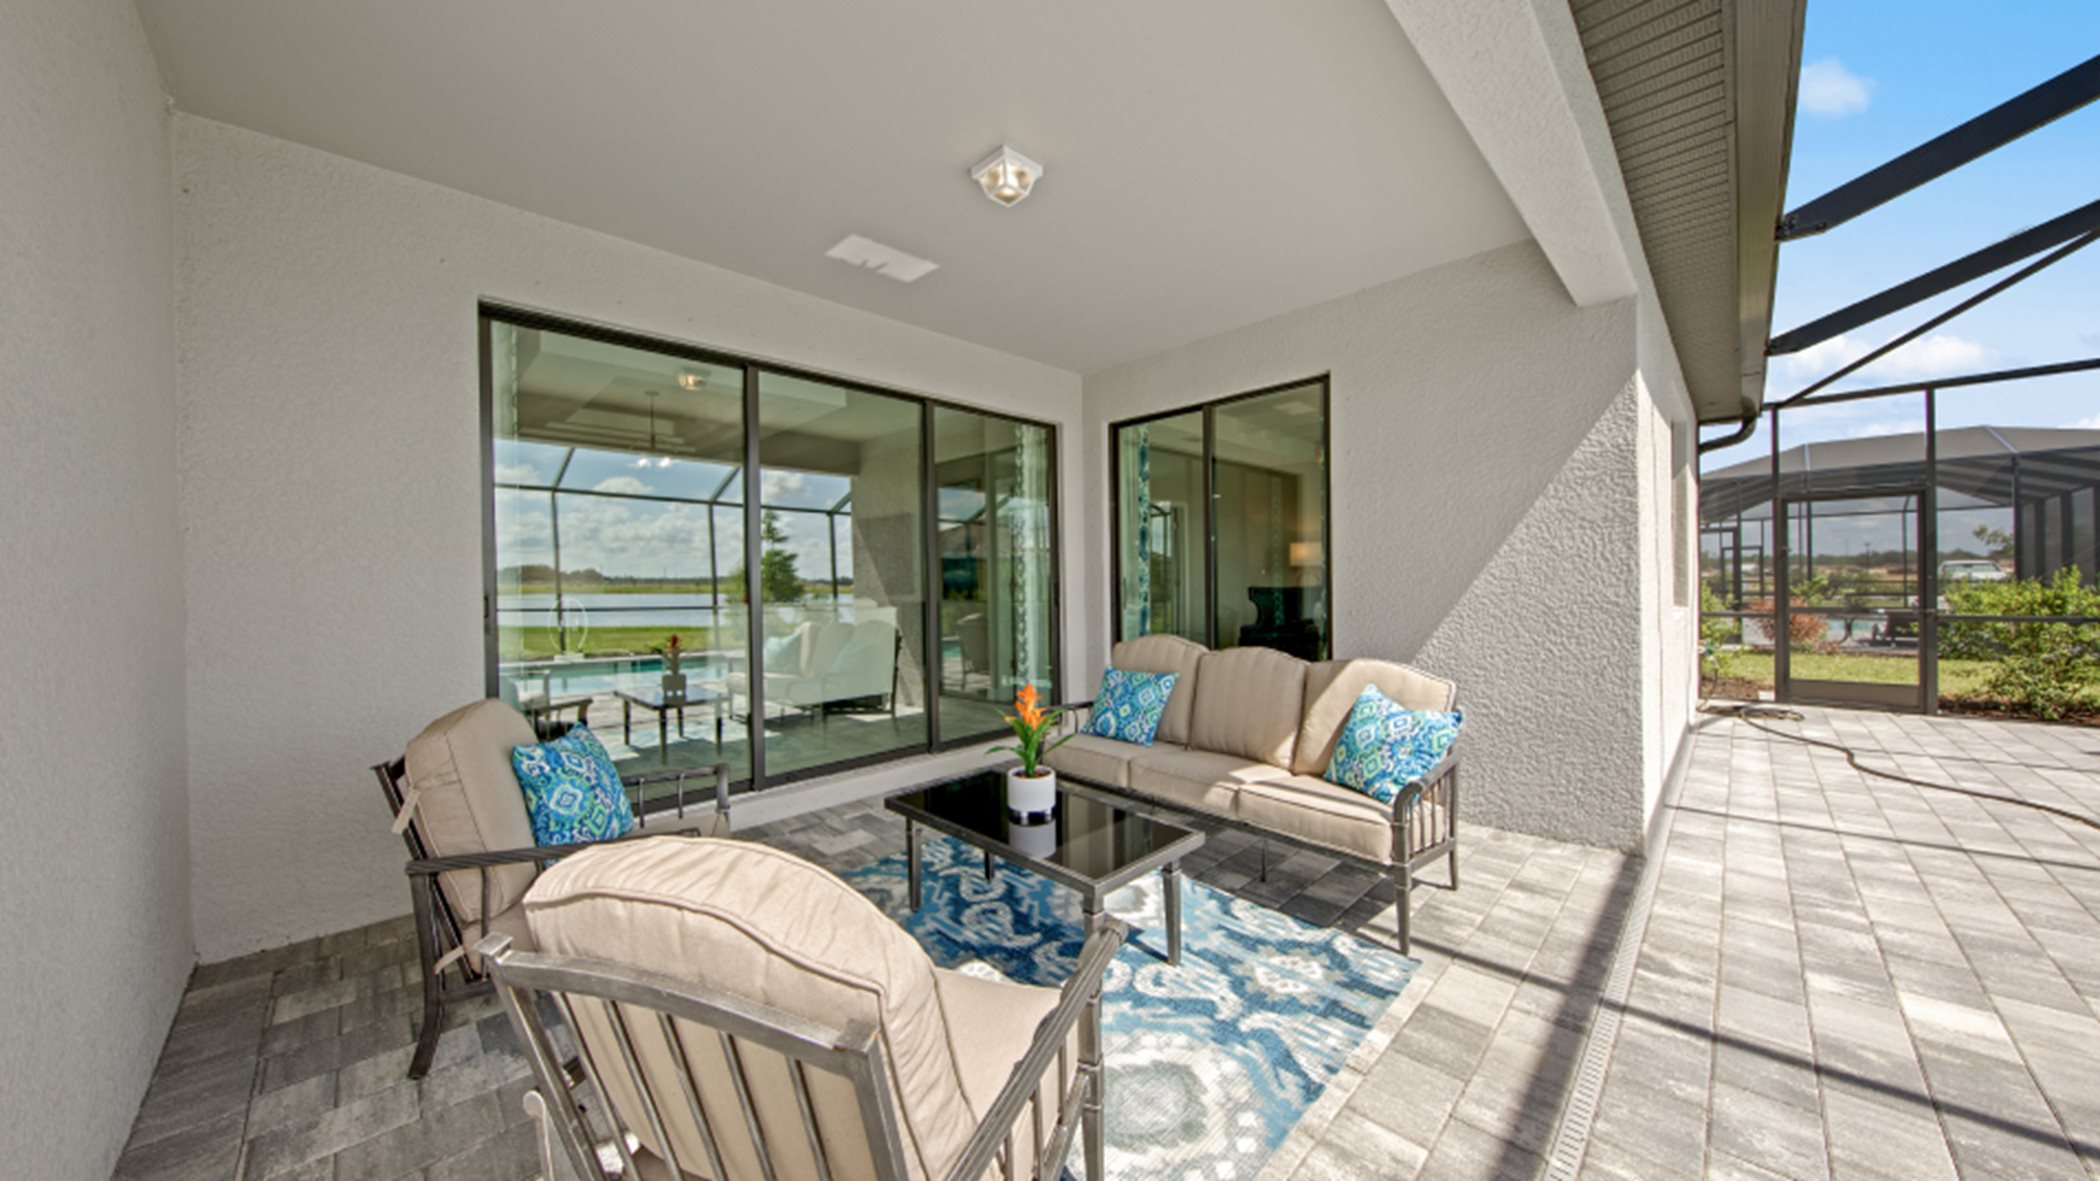 Portico Manor homes The Summerville II Outdoor Space